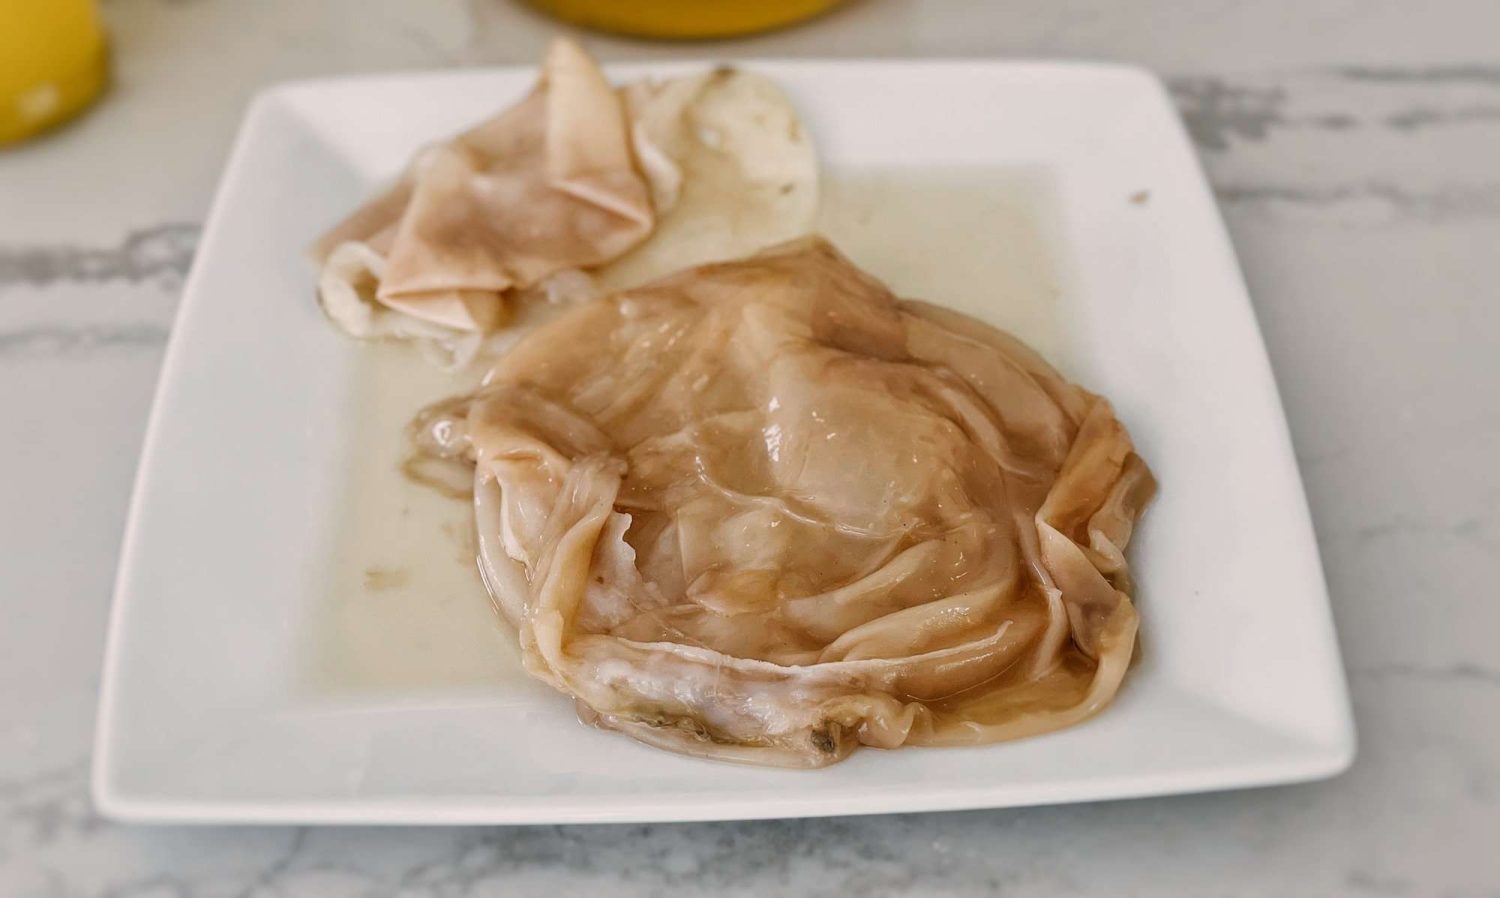 SCOBY sitting on a square white plate